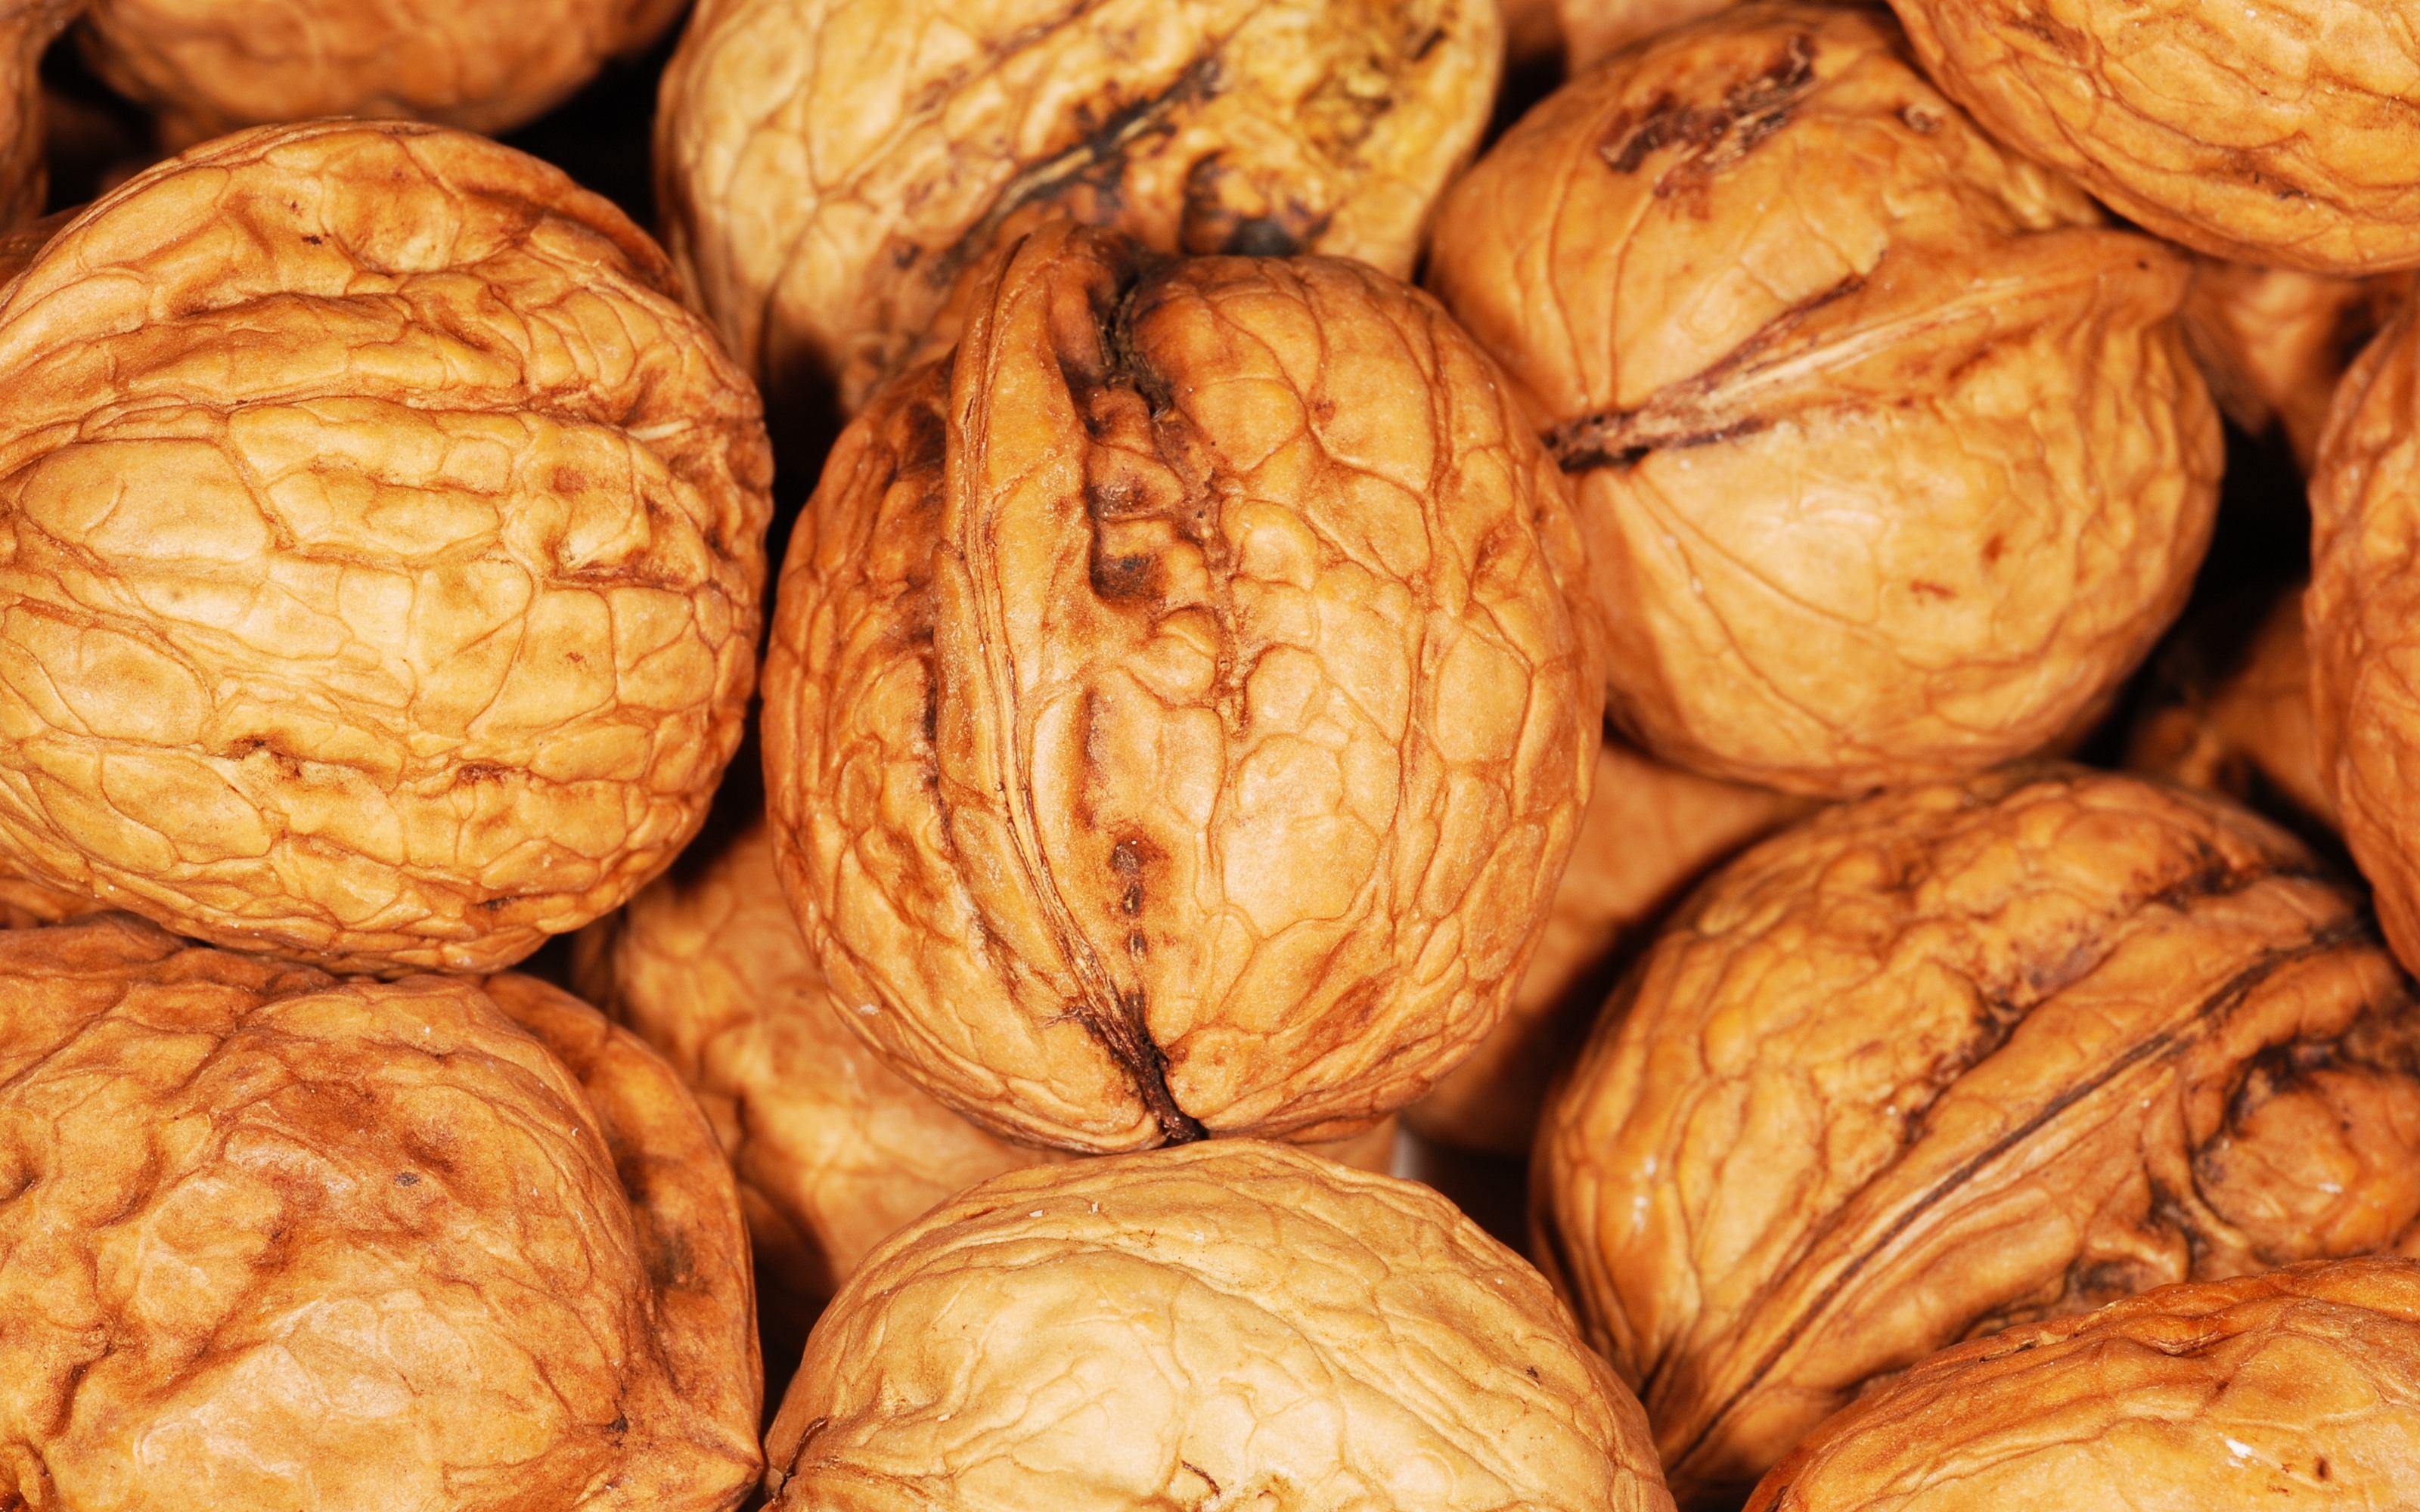 69365 download wallpaper food, nuts, shell, walnut screensavers and pictures for free